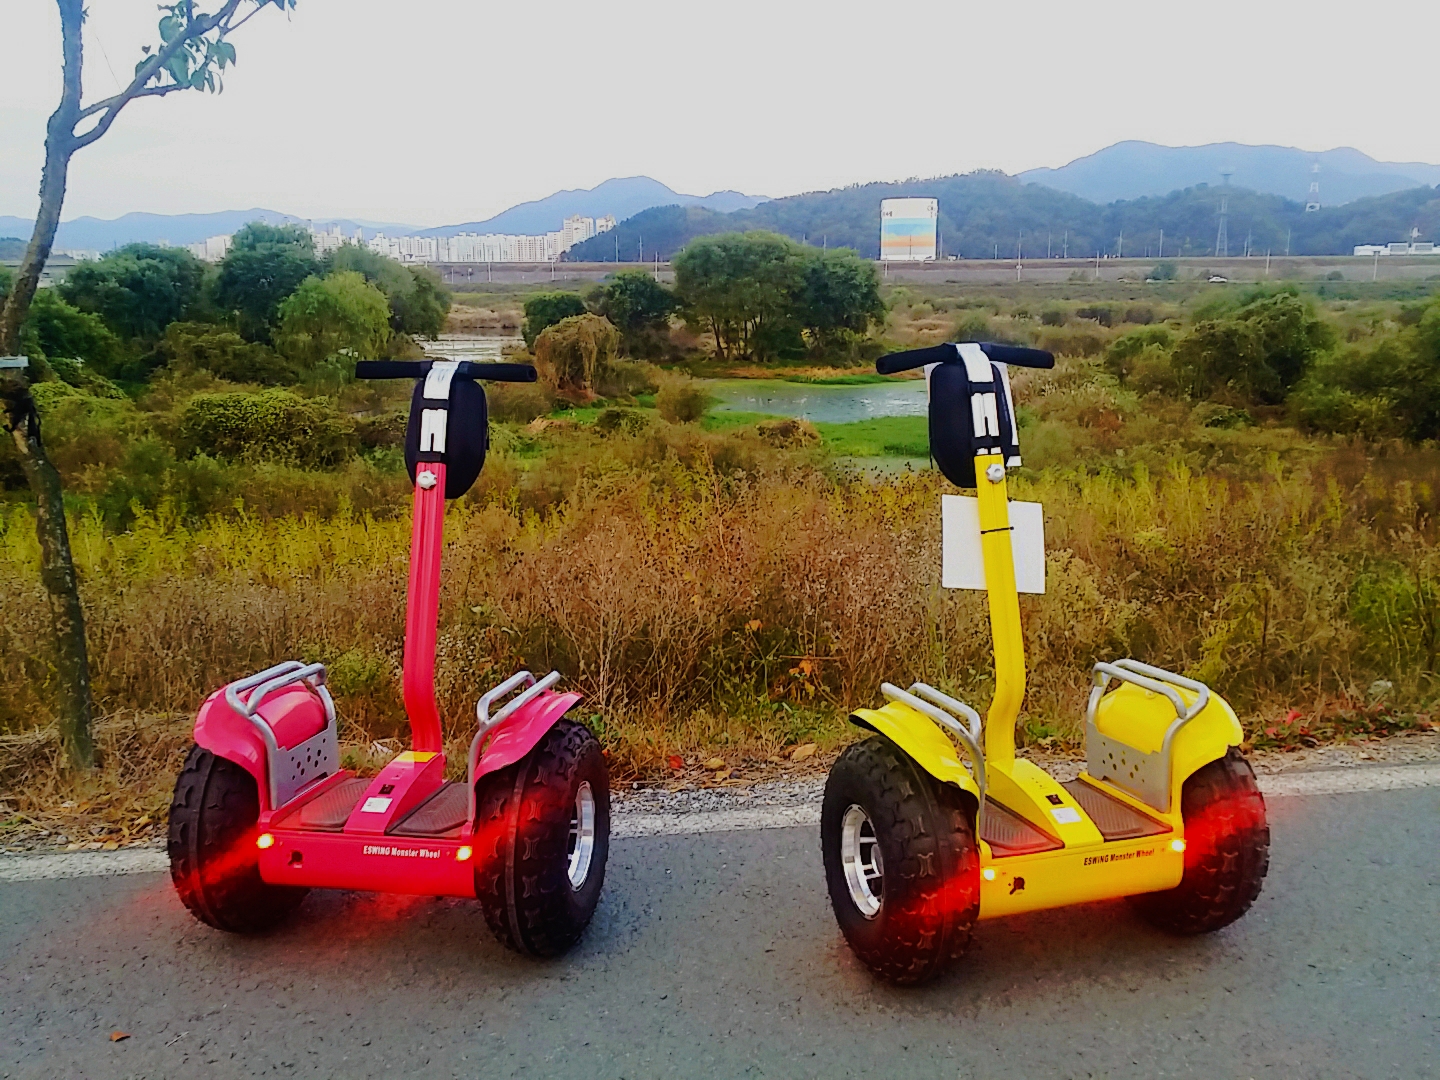 2 wheel electric scooter